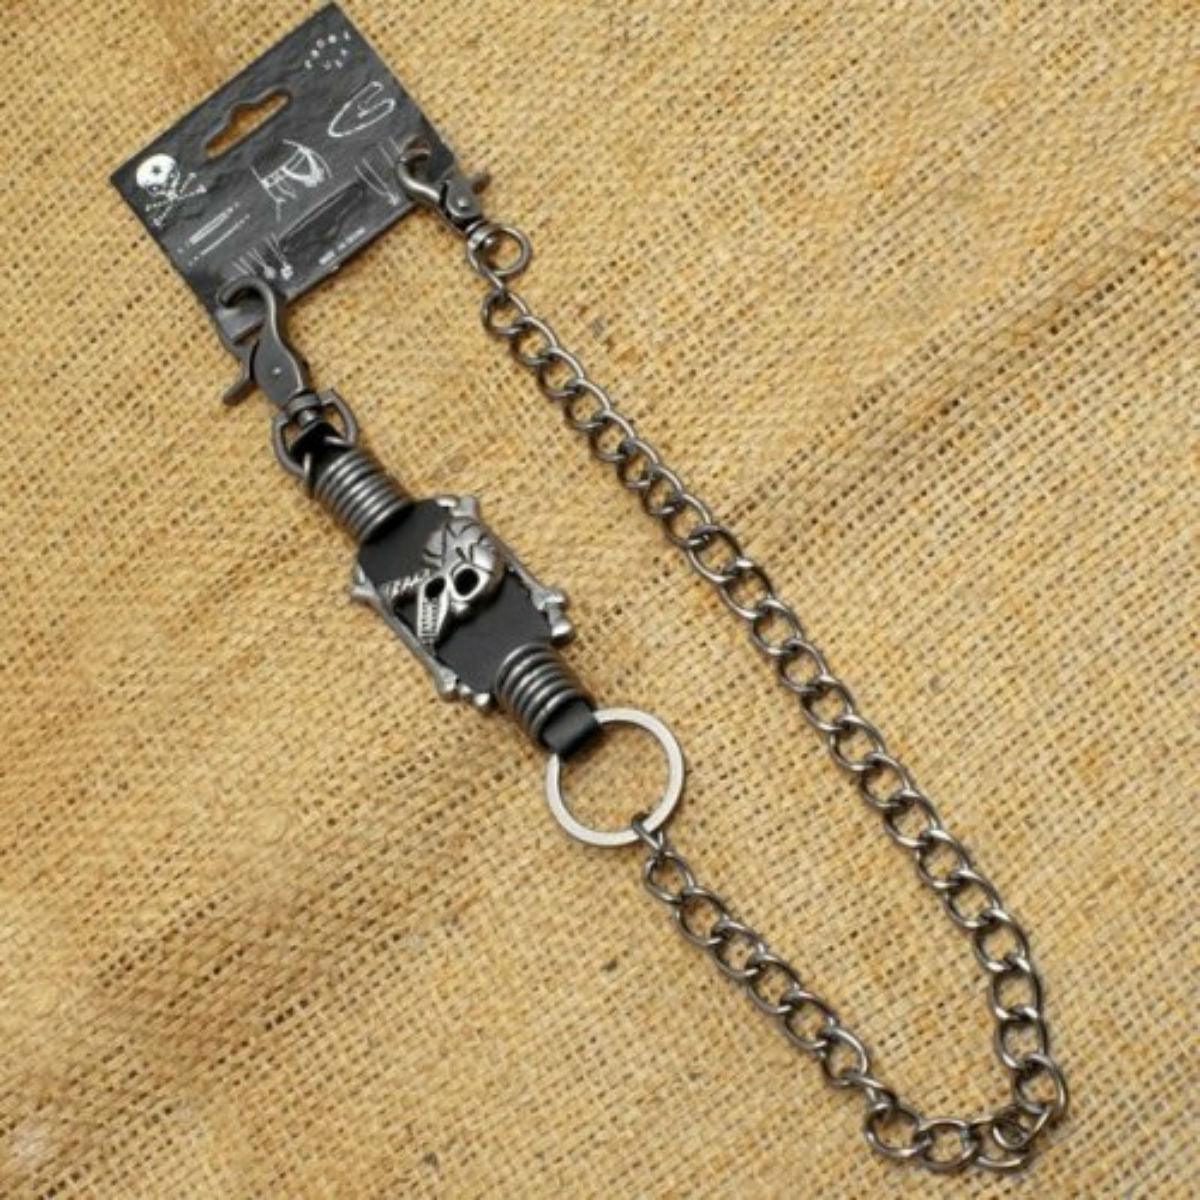 Daniel Smart Wallet Chain with skull metal rings and leather designs - American Legend Rider